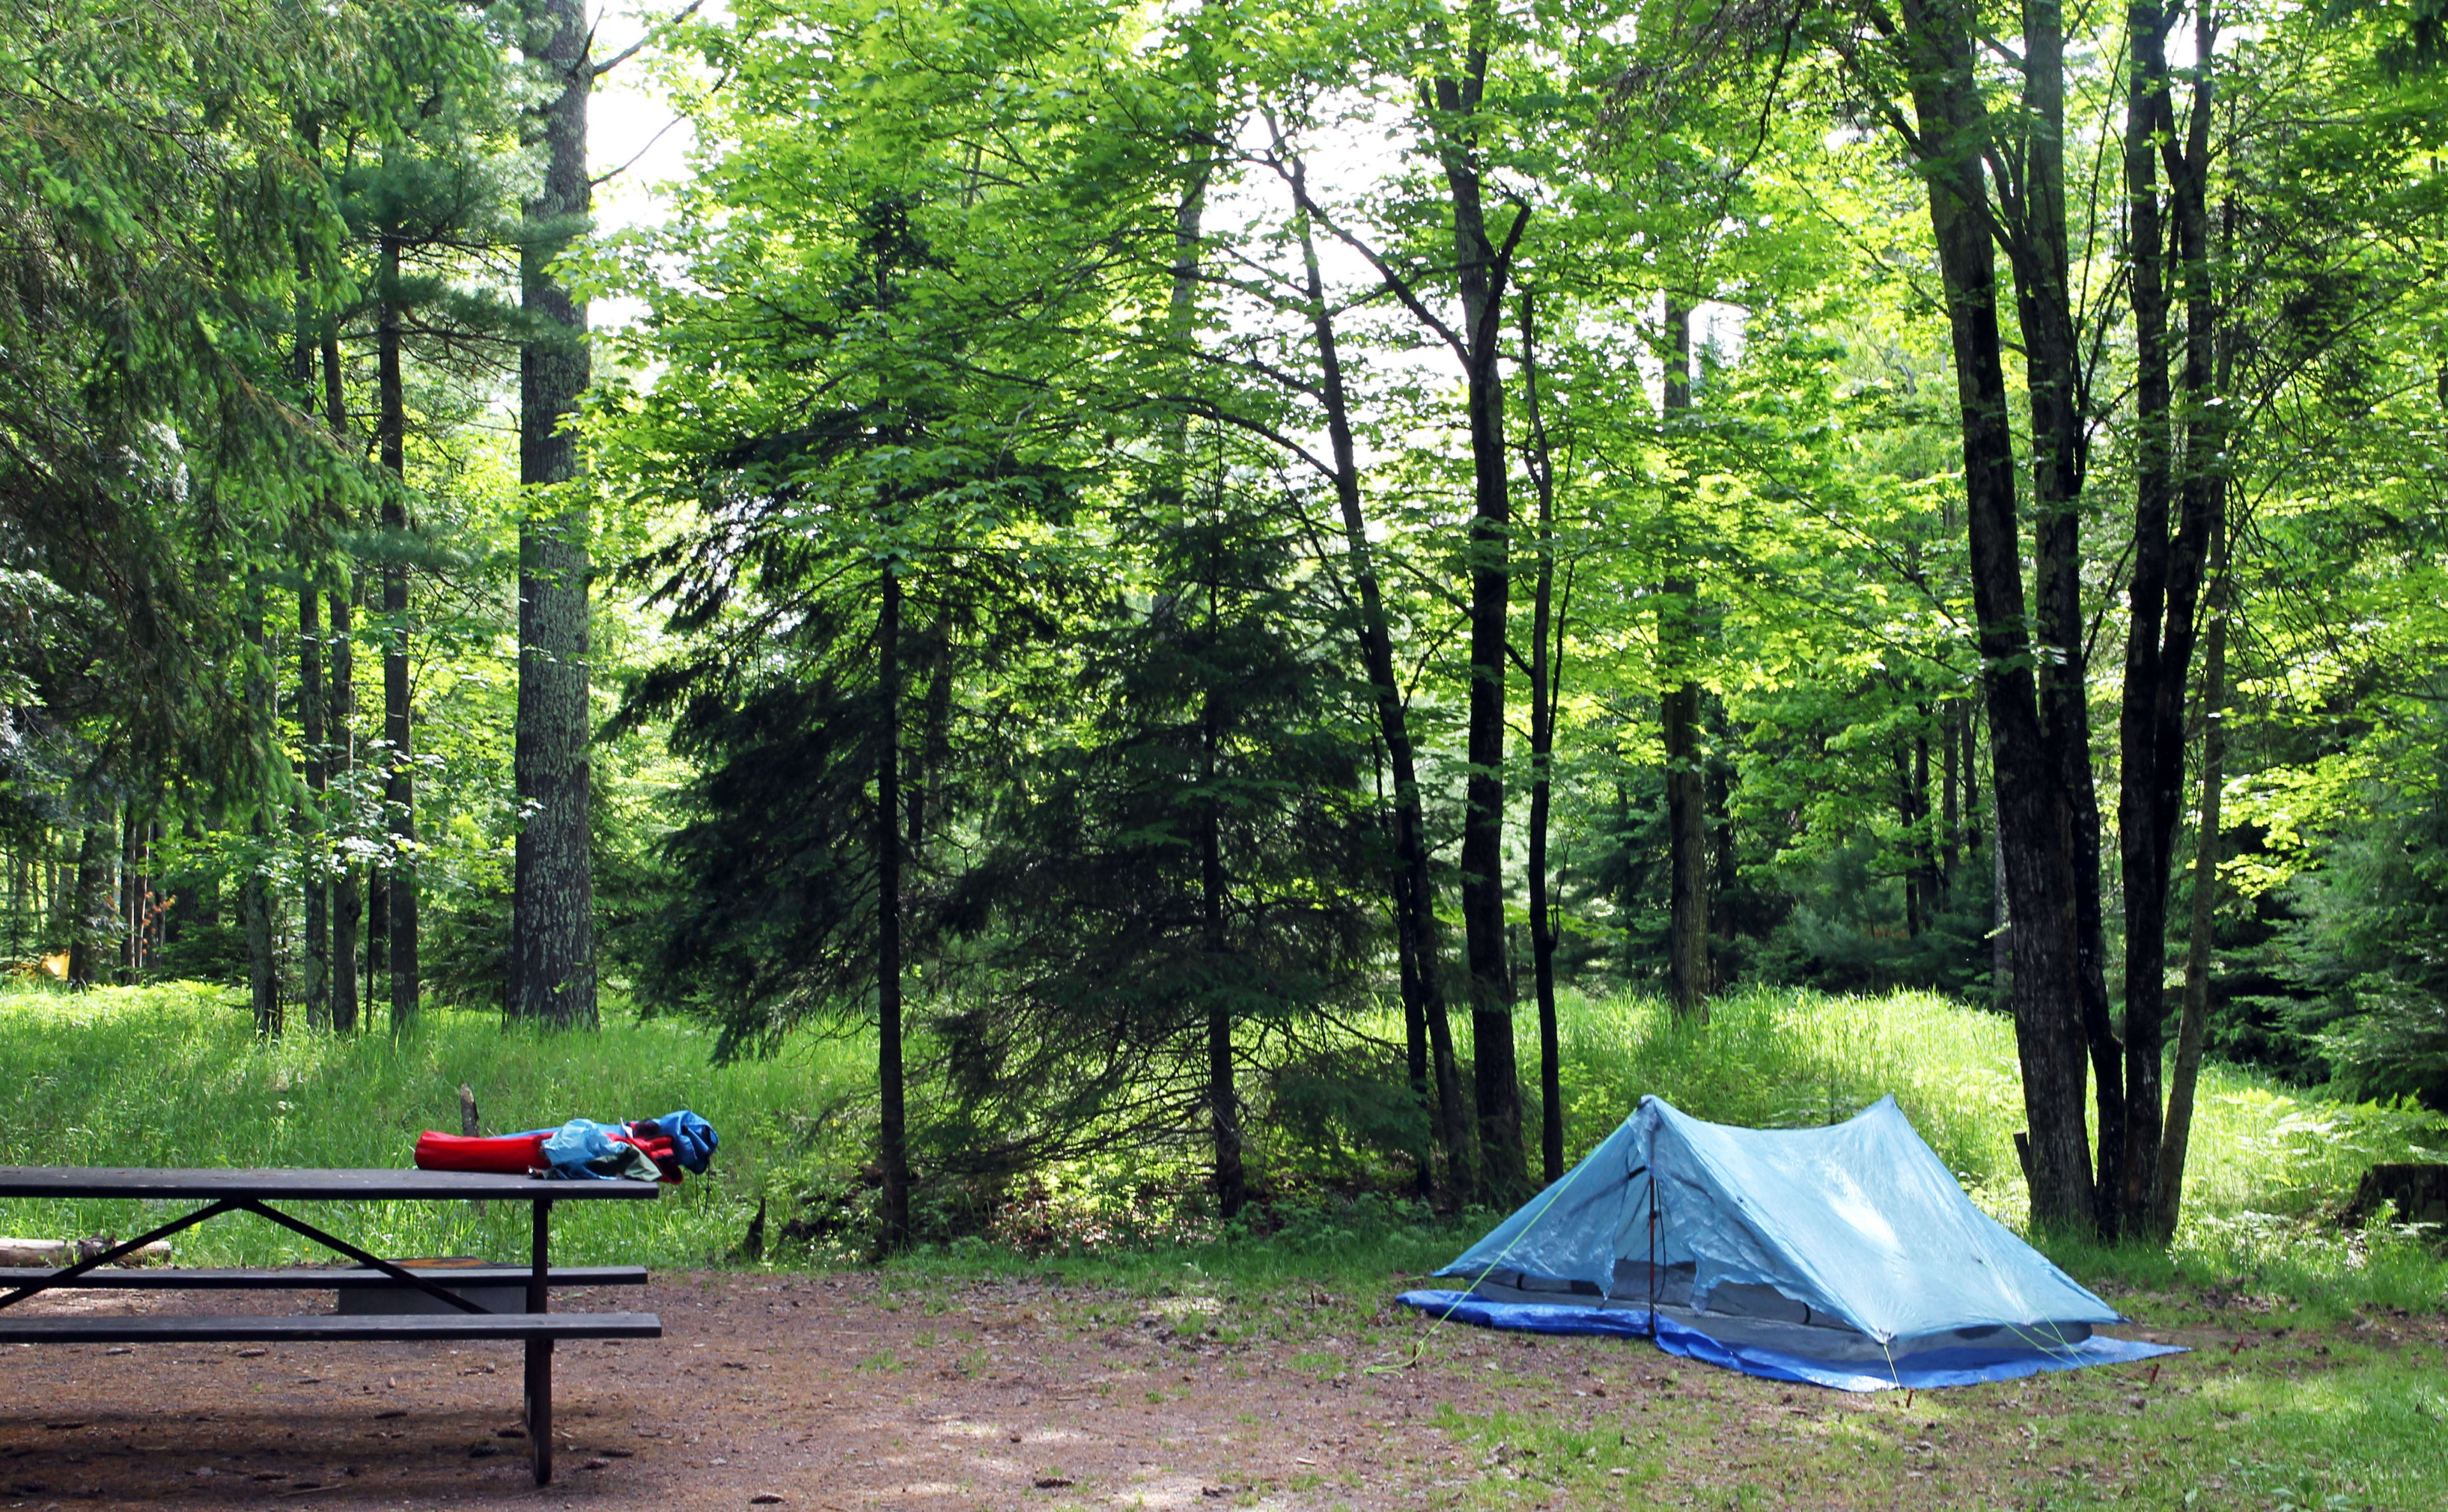 Campsite 047, in the West Loop.  The best sites here are located in the outside loop.  The ground is nice and soft, with hemlocks and pine surrounding the campground.